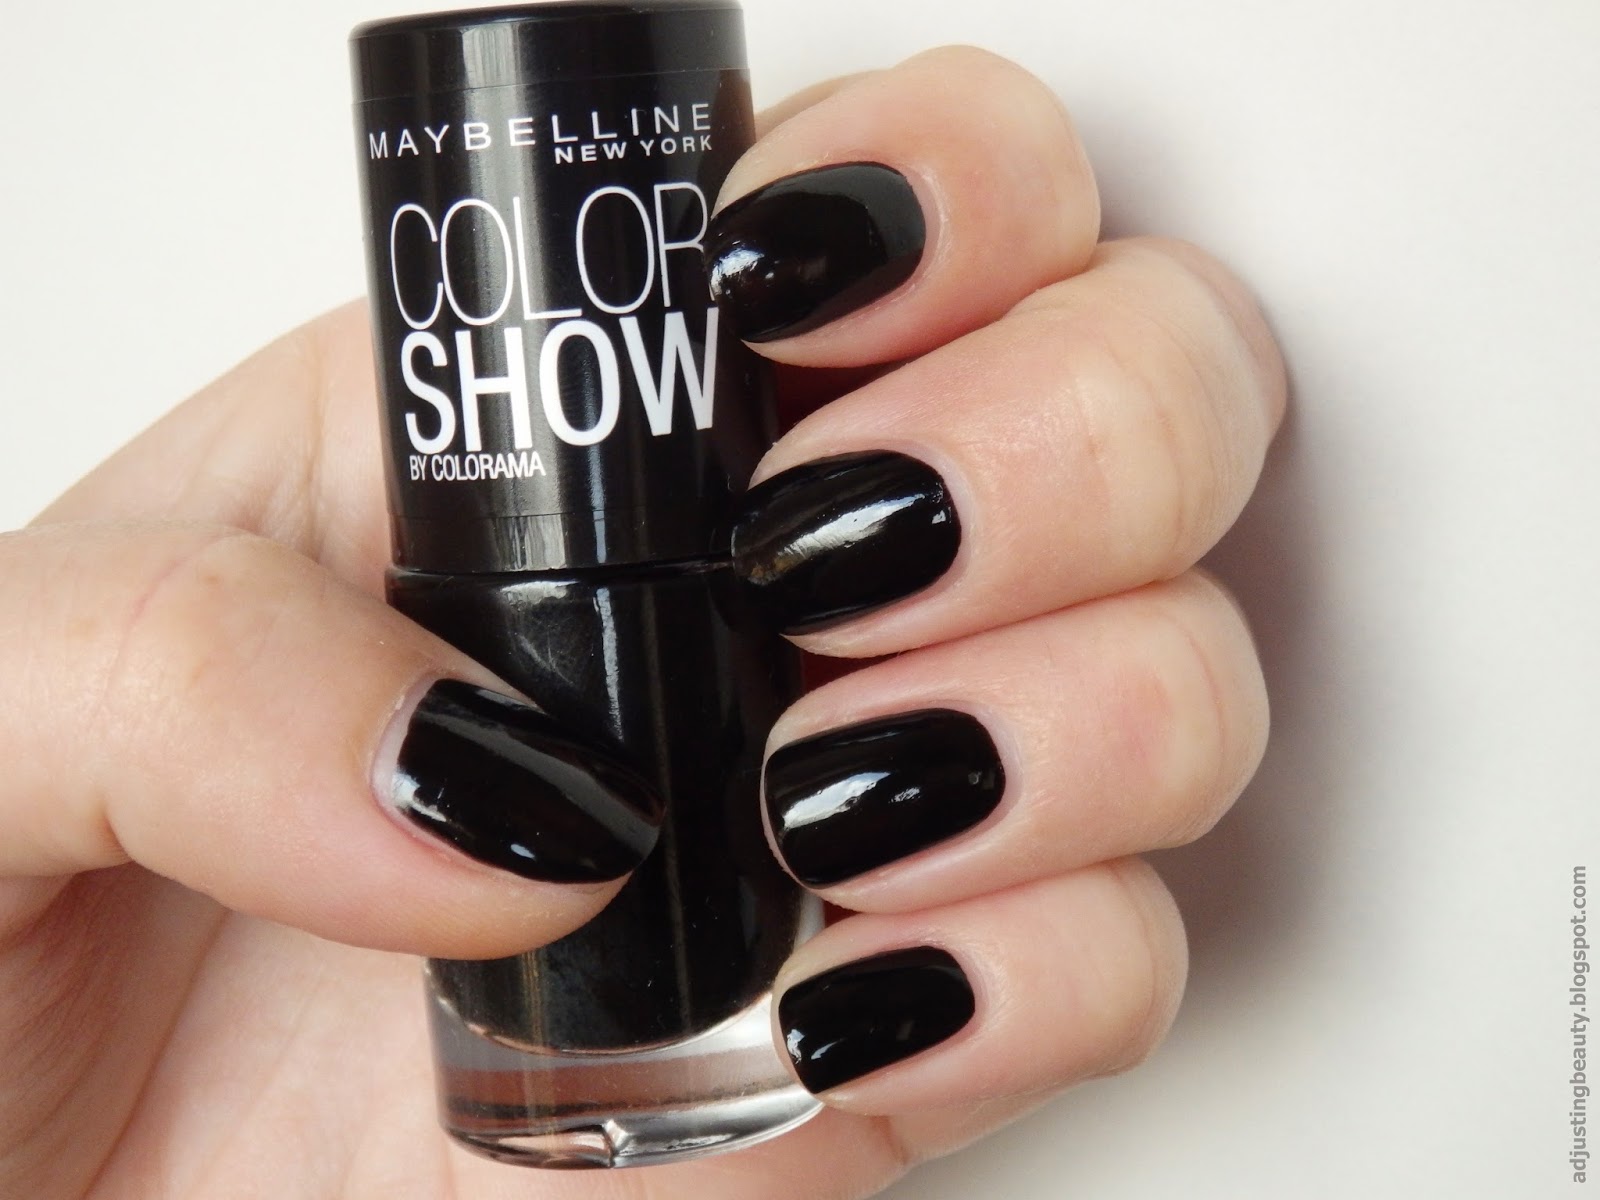 Maybelline Color Show Nail Polish in Sugar Crystals - wide 2